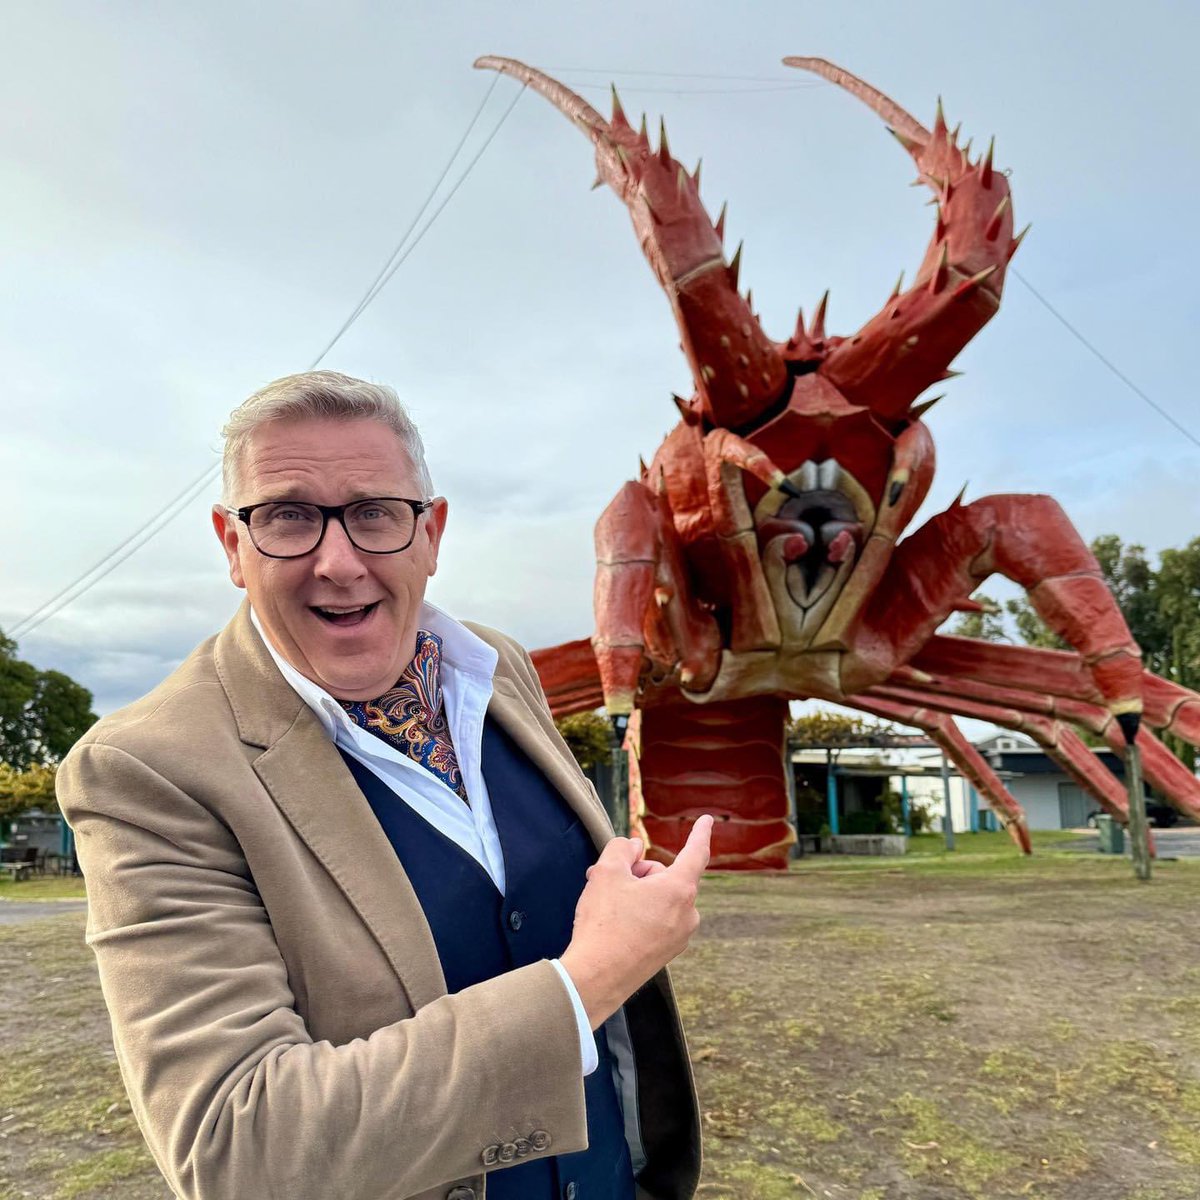 In Kingston, South Australia, thought I was meeting a family with a puppy 🐶 

… meet ‘The Big Lobster’ 🦞 … a landmark in these parts 😮 

@DogsBehavingAU 

#onlocation #australia #DogsBehavingVeryBadlyAU #DBVBAU